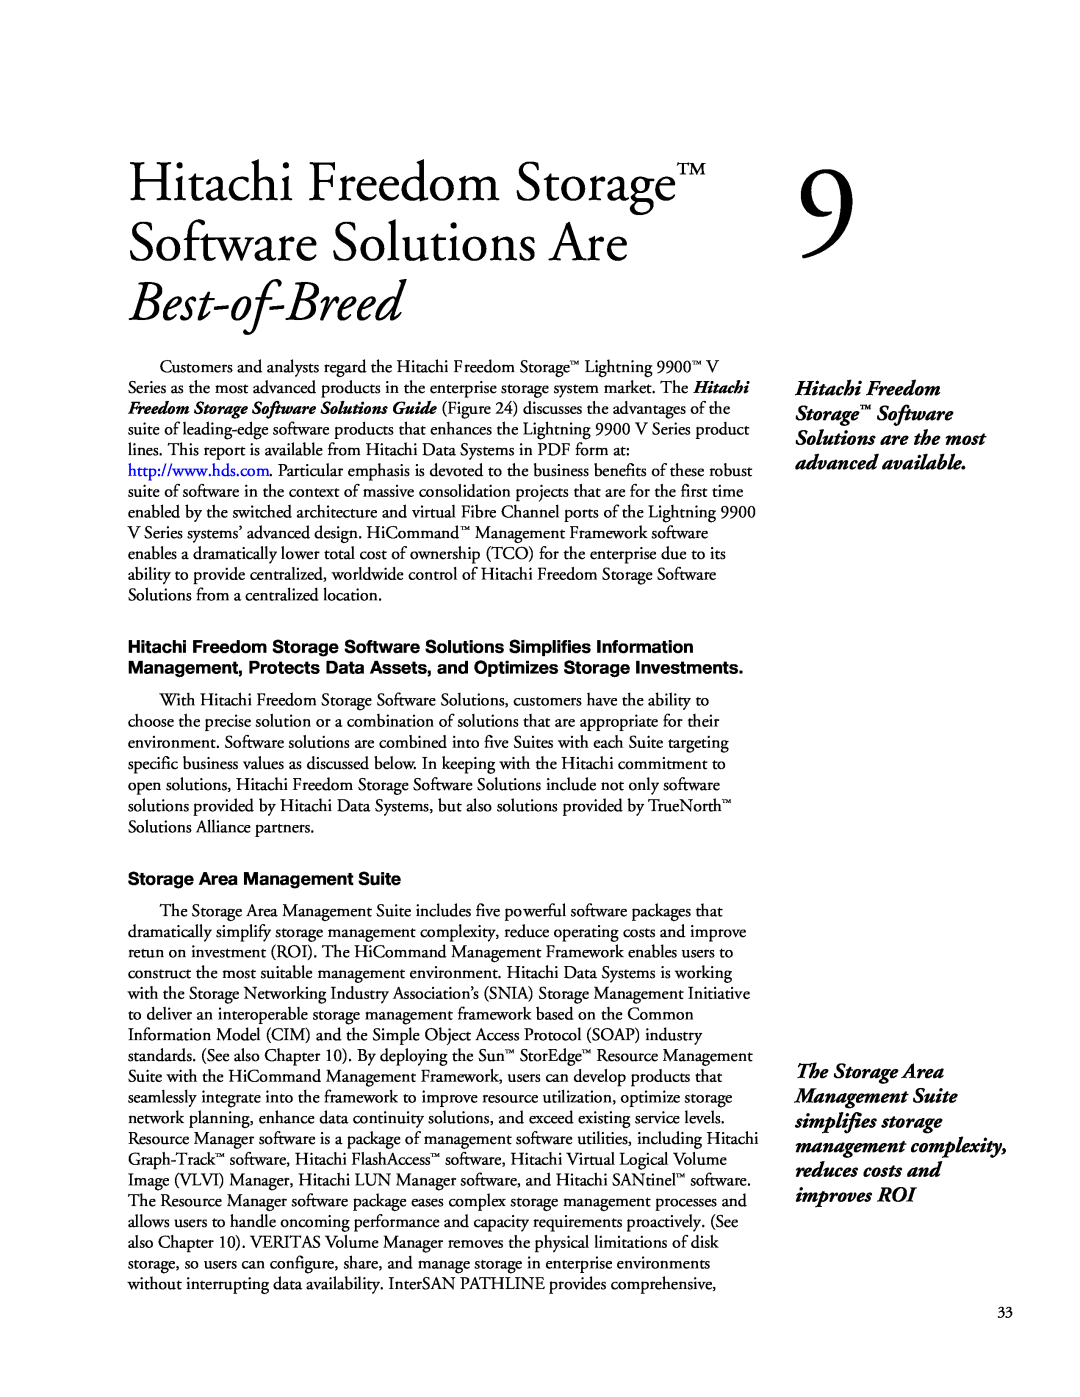 Hitachi 9900 manual Software Solutions Are, Hitachi Freedom Storage, Best-of-Breed, Storage Area Management Suite 